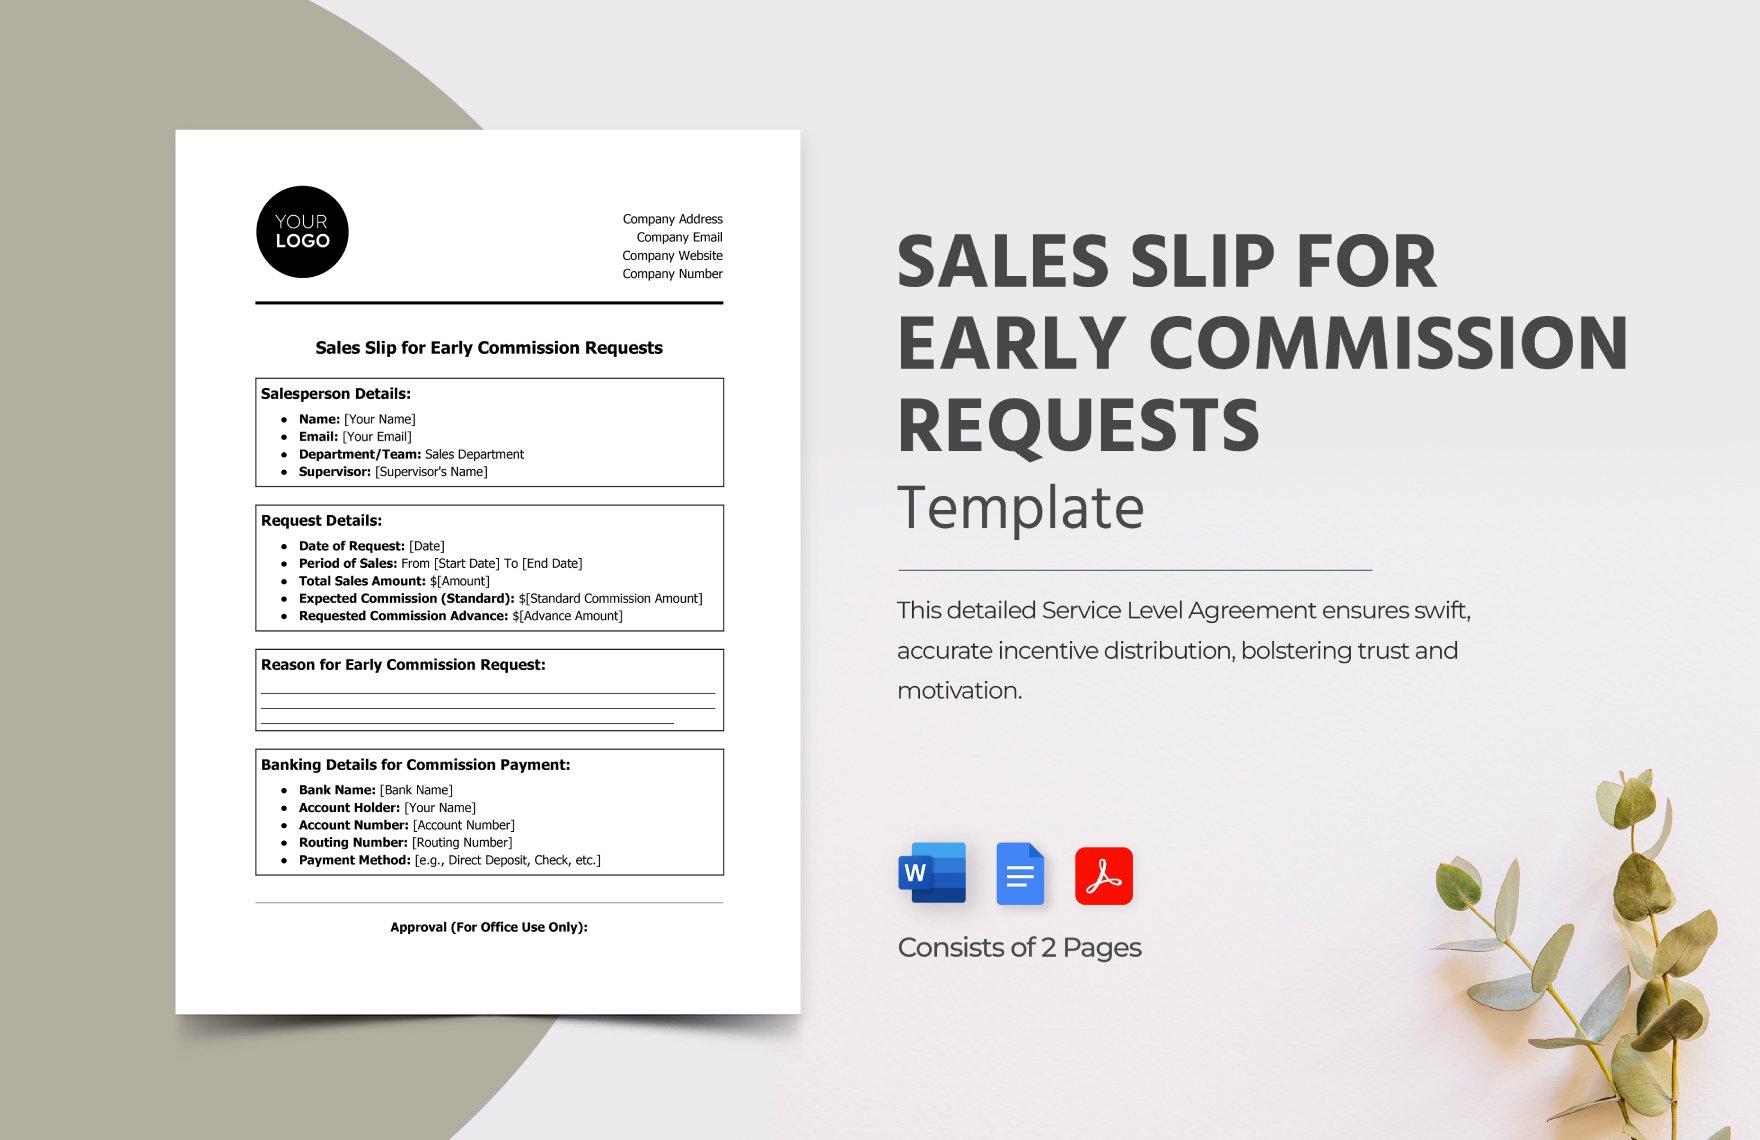 Sales Slip for Early Commission Requests Template